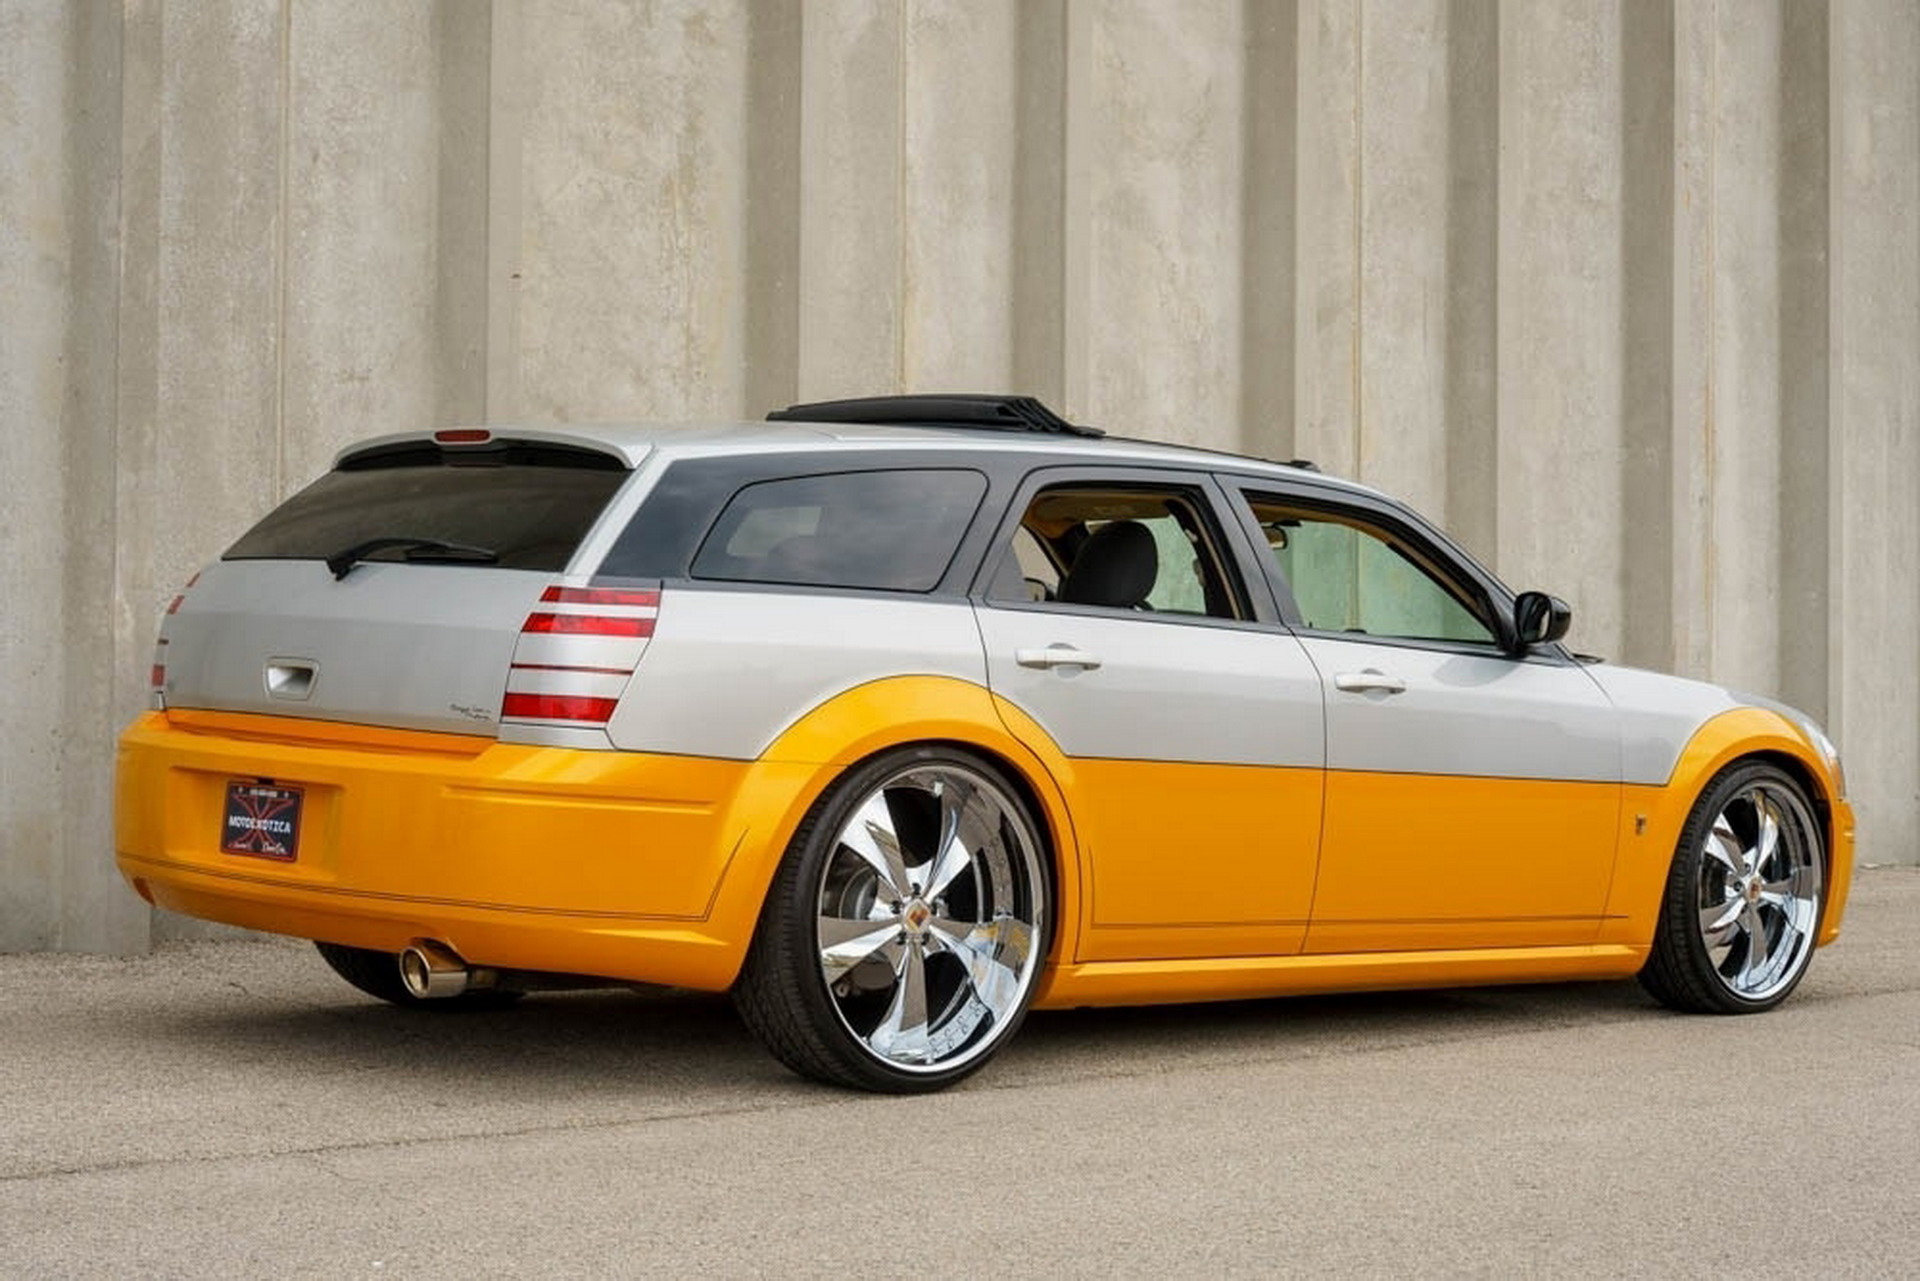 George Barris-Designed Dodge Magnum Custom Build Is Really Something |  Carscoops